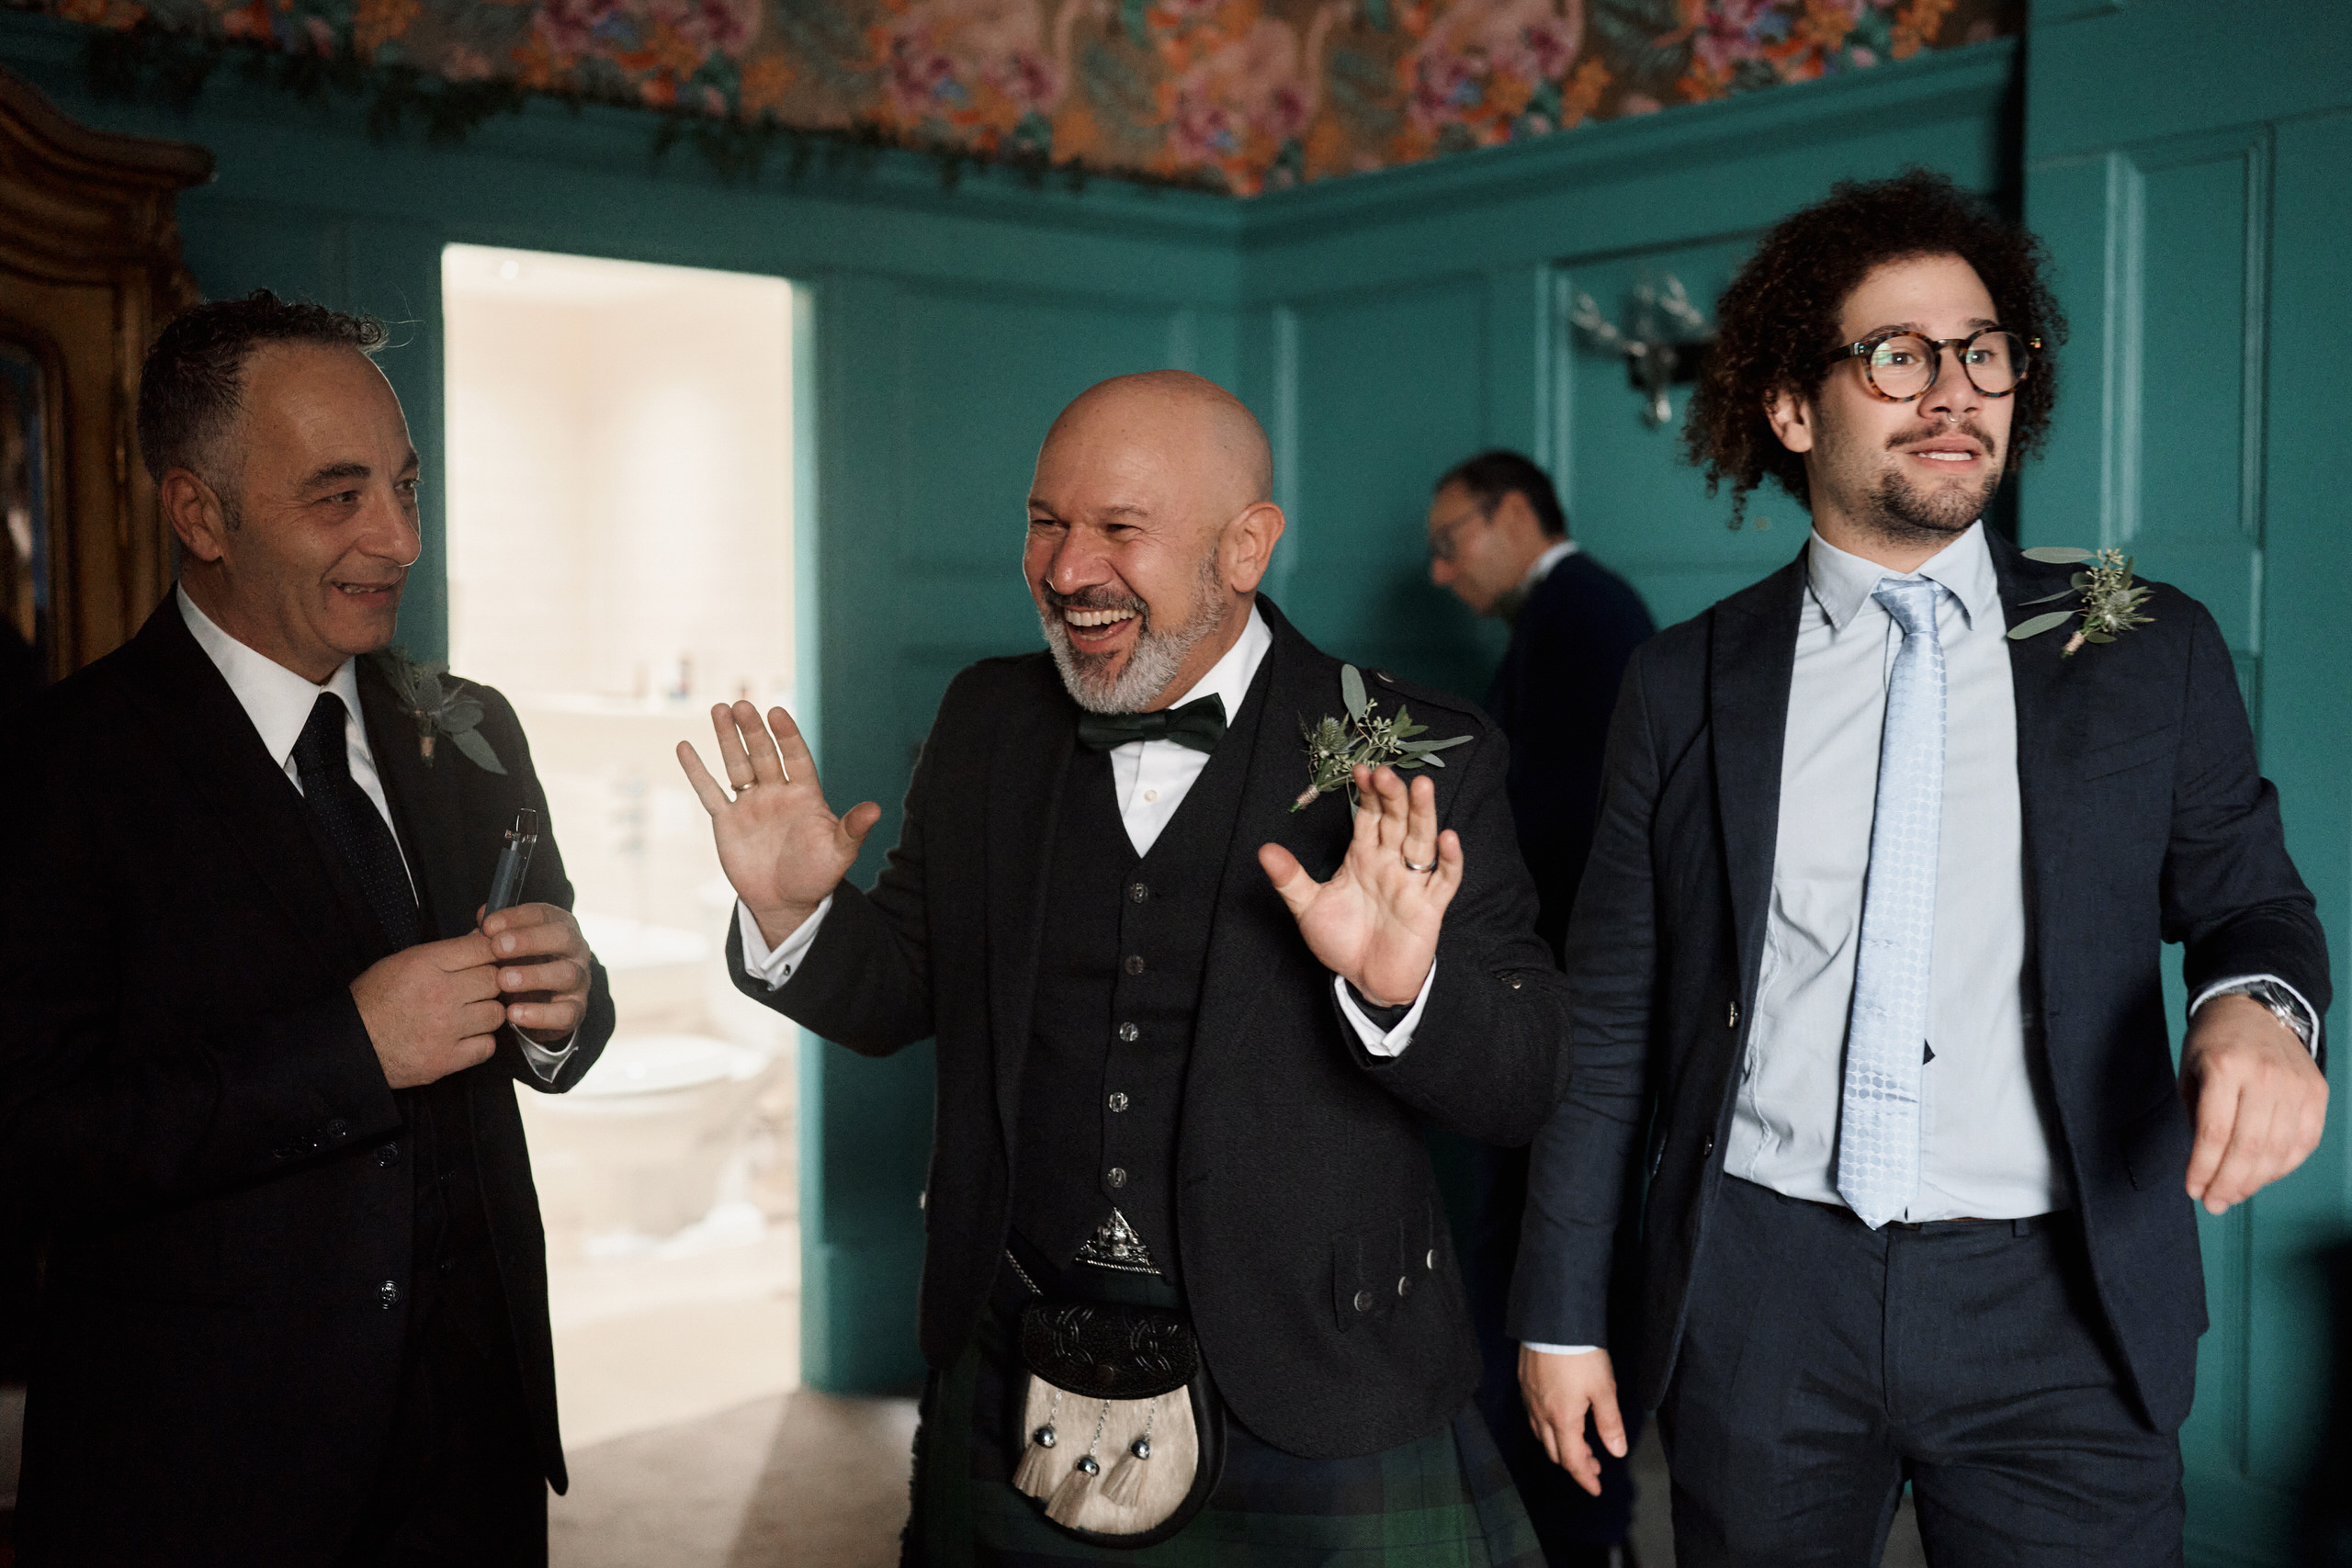 Three guys dressed in suits and kilts are in a room.